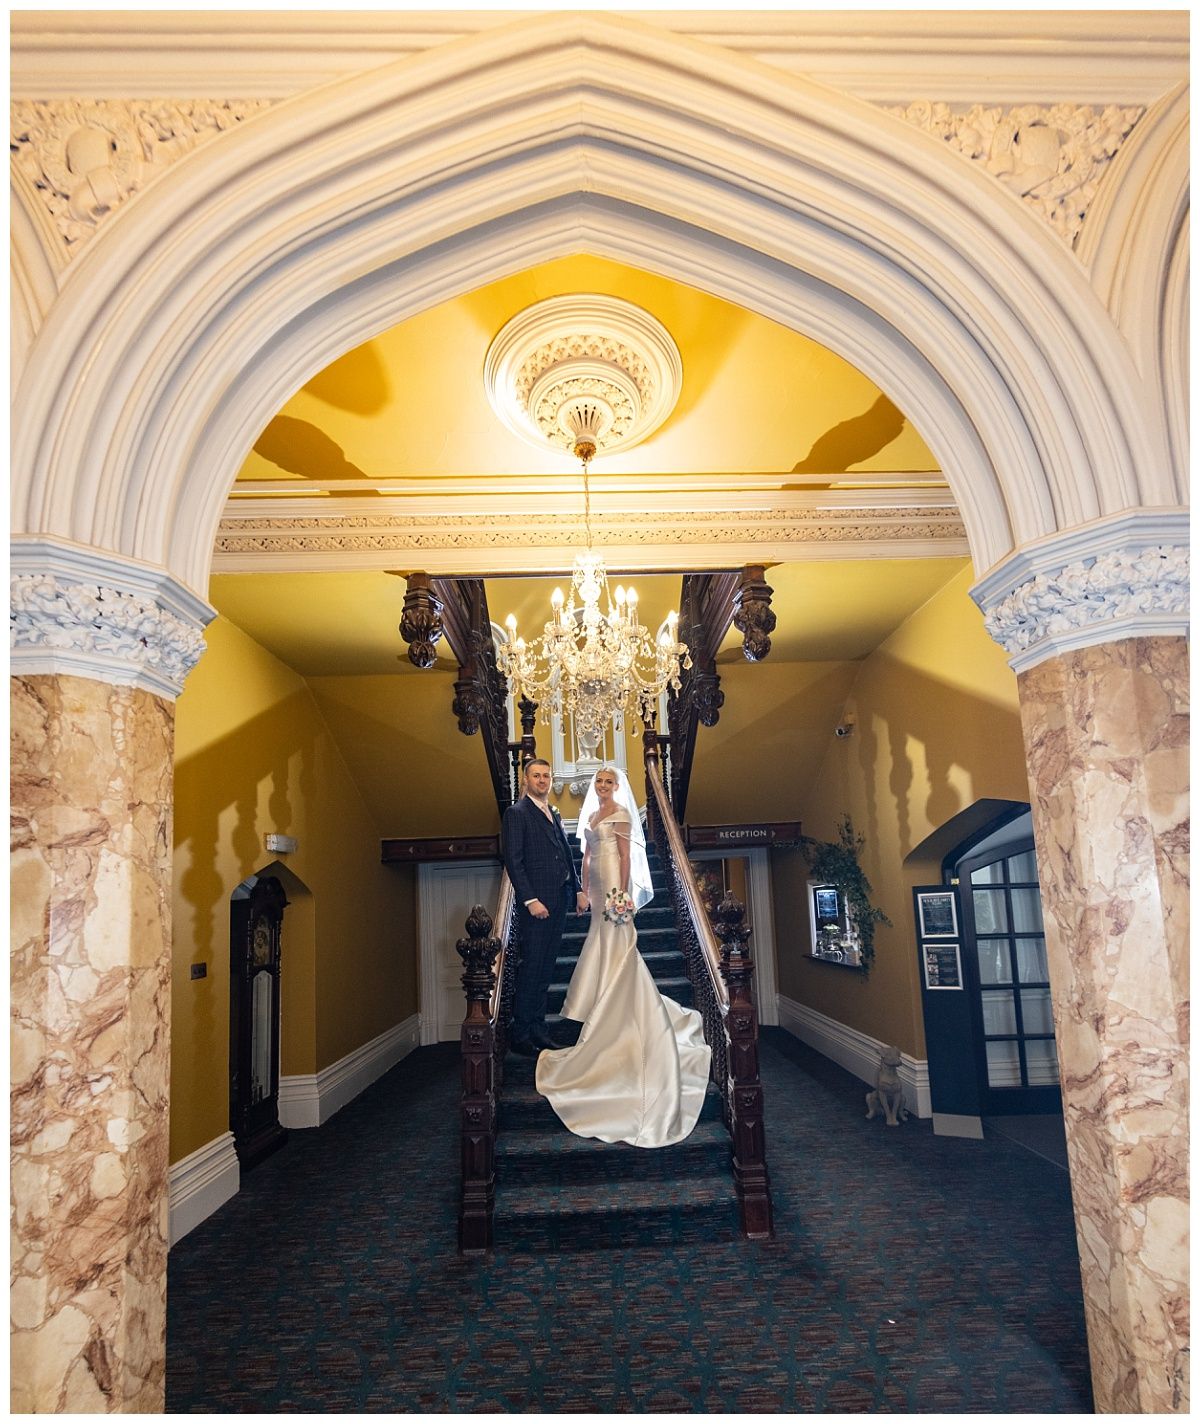 Rick Dell Photography - Catherine and Josh’s Enchanting Wedding Day at Hollin House Hotel